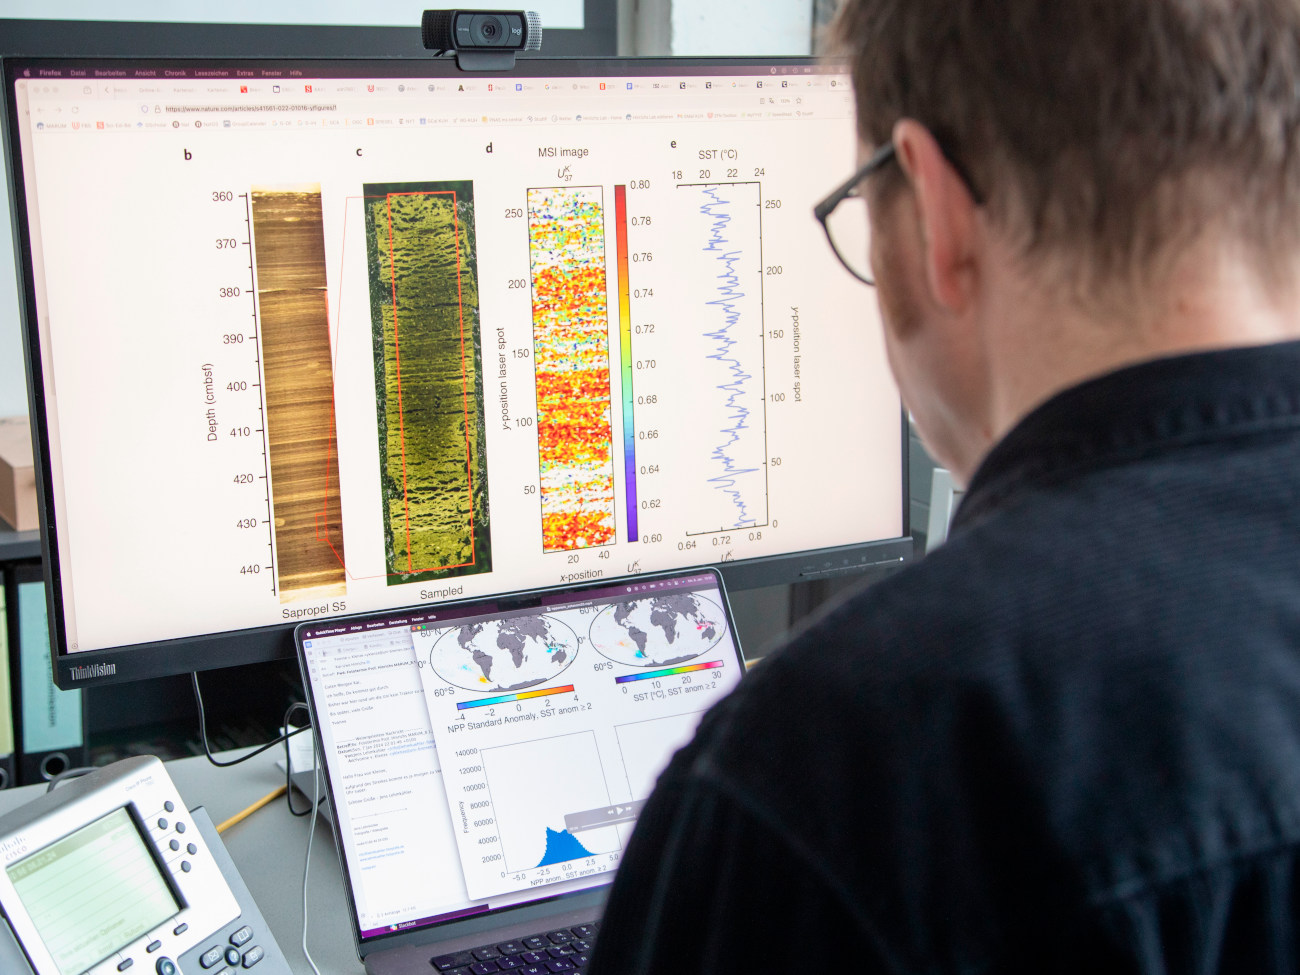 Kai-Uwe Hinrichs is sitting in front of a computer screen showing the distribution of molecules in a section of a sediment core.